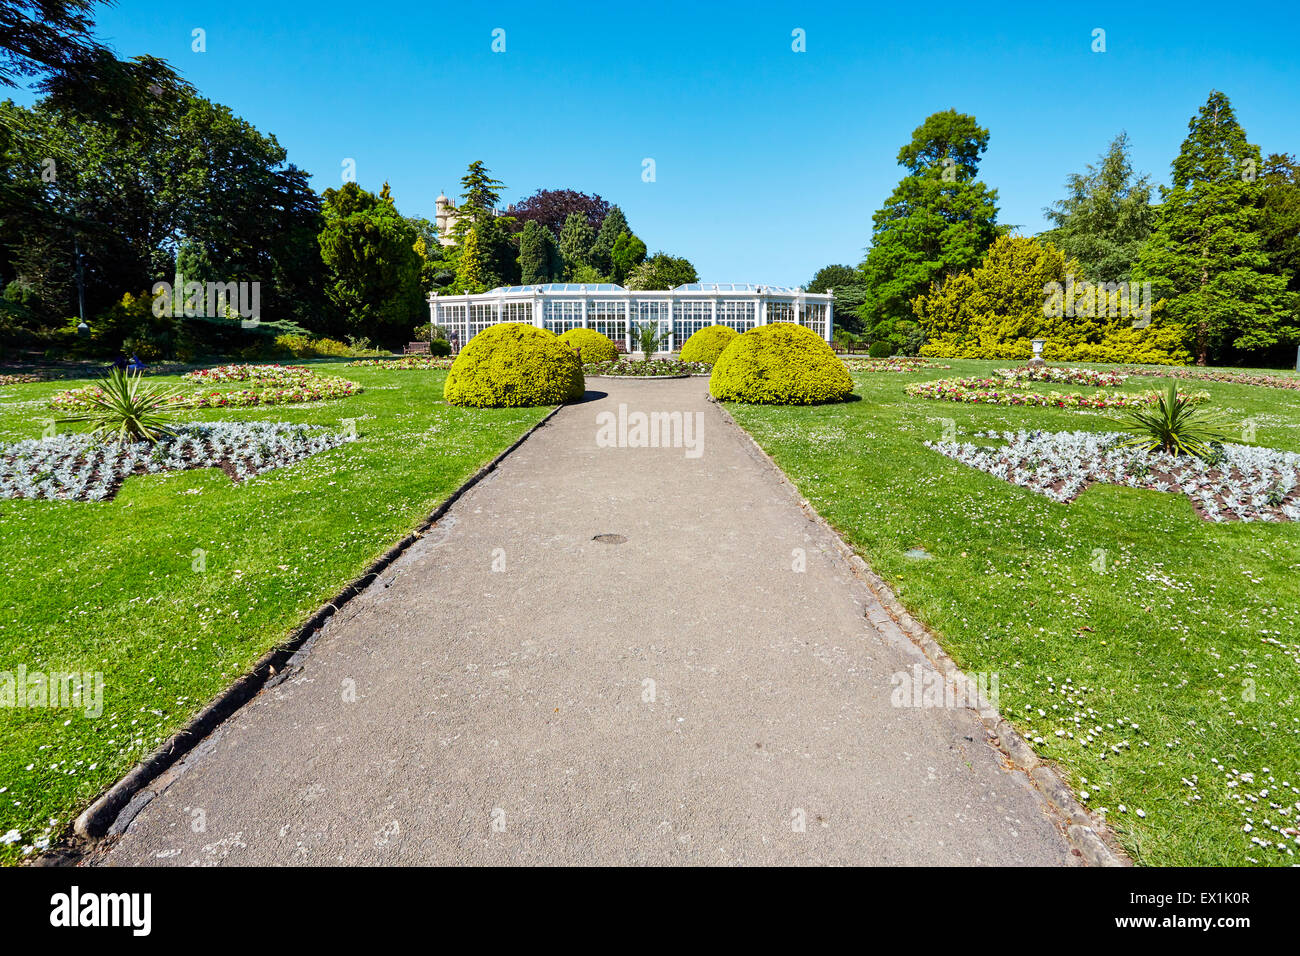 View of the glasshouse and gardens at Wollaton Hall, Nottingham, England. Stock Photo